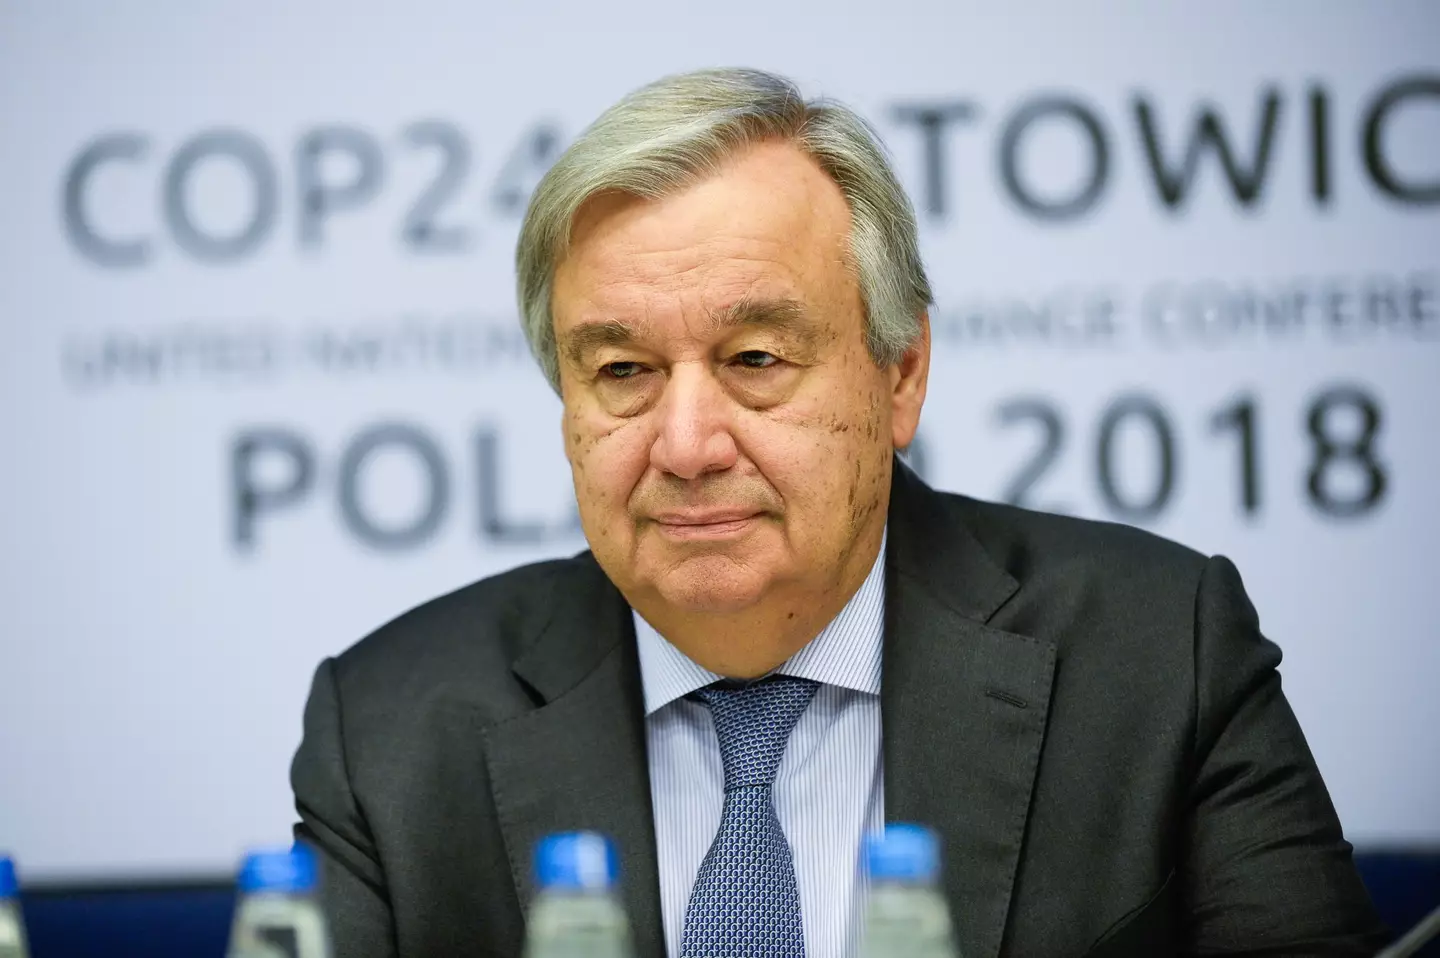 UN secretary-general António Guterres has warned that humanity risks being wiped out.